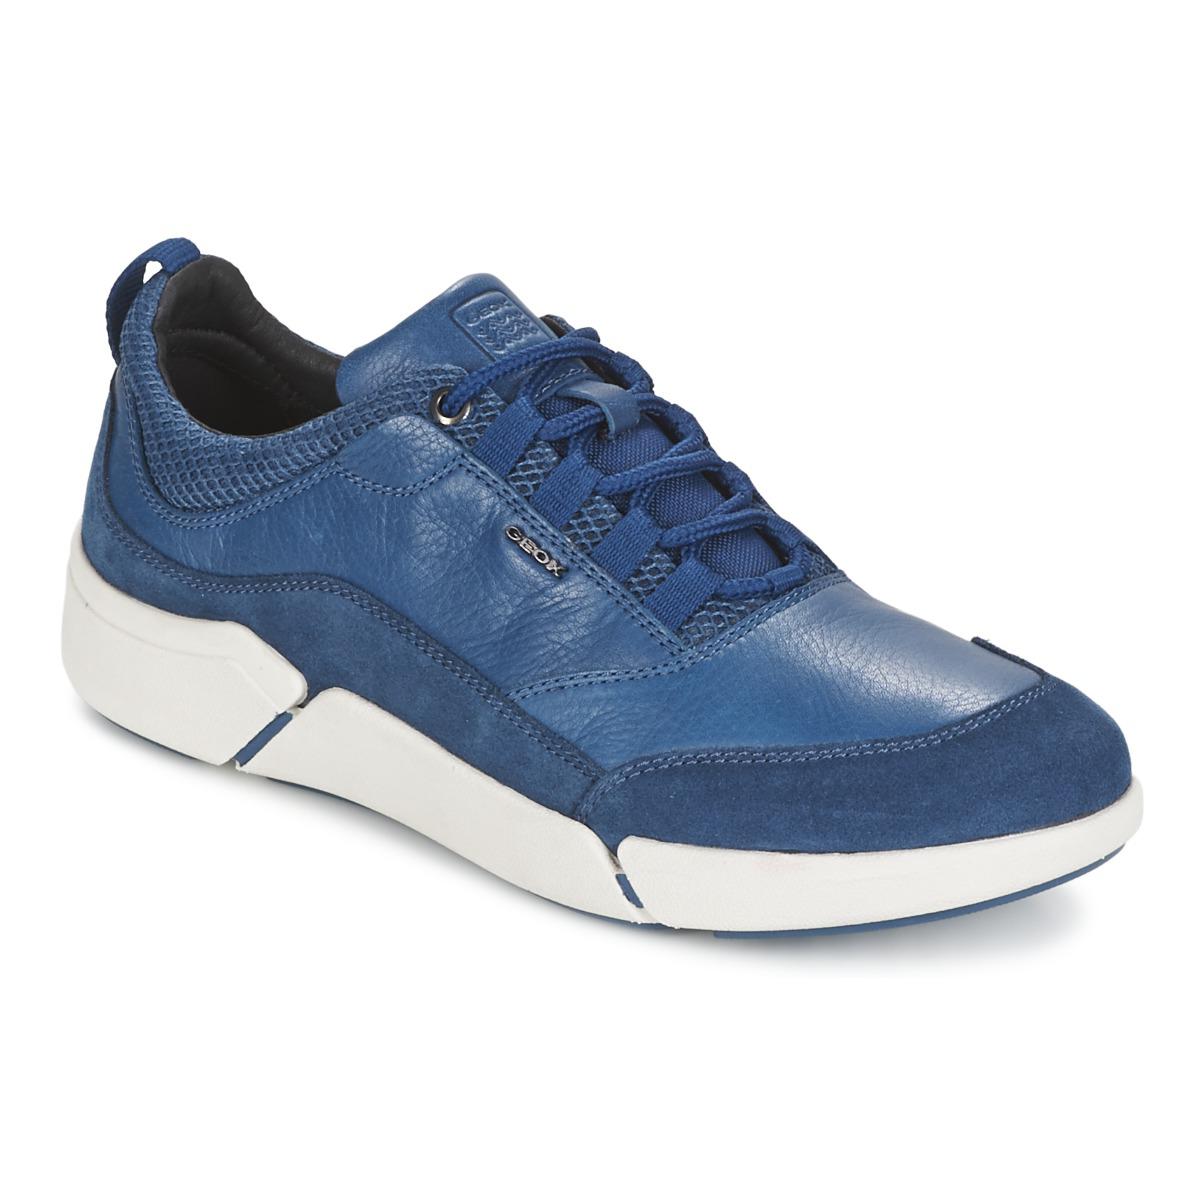 Geox Leather Ailand Men's Shoes (trainers) In Blue for Men - Lyst